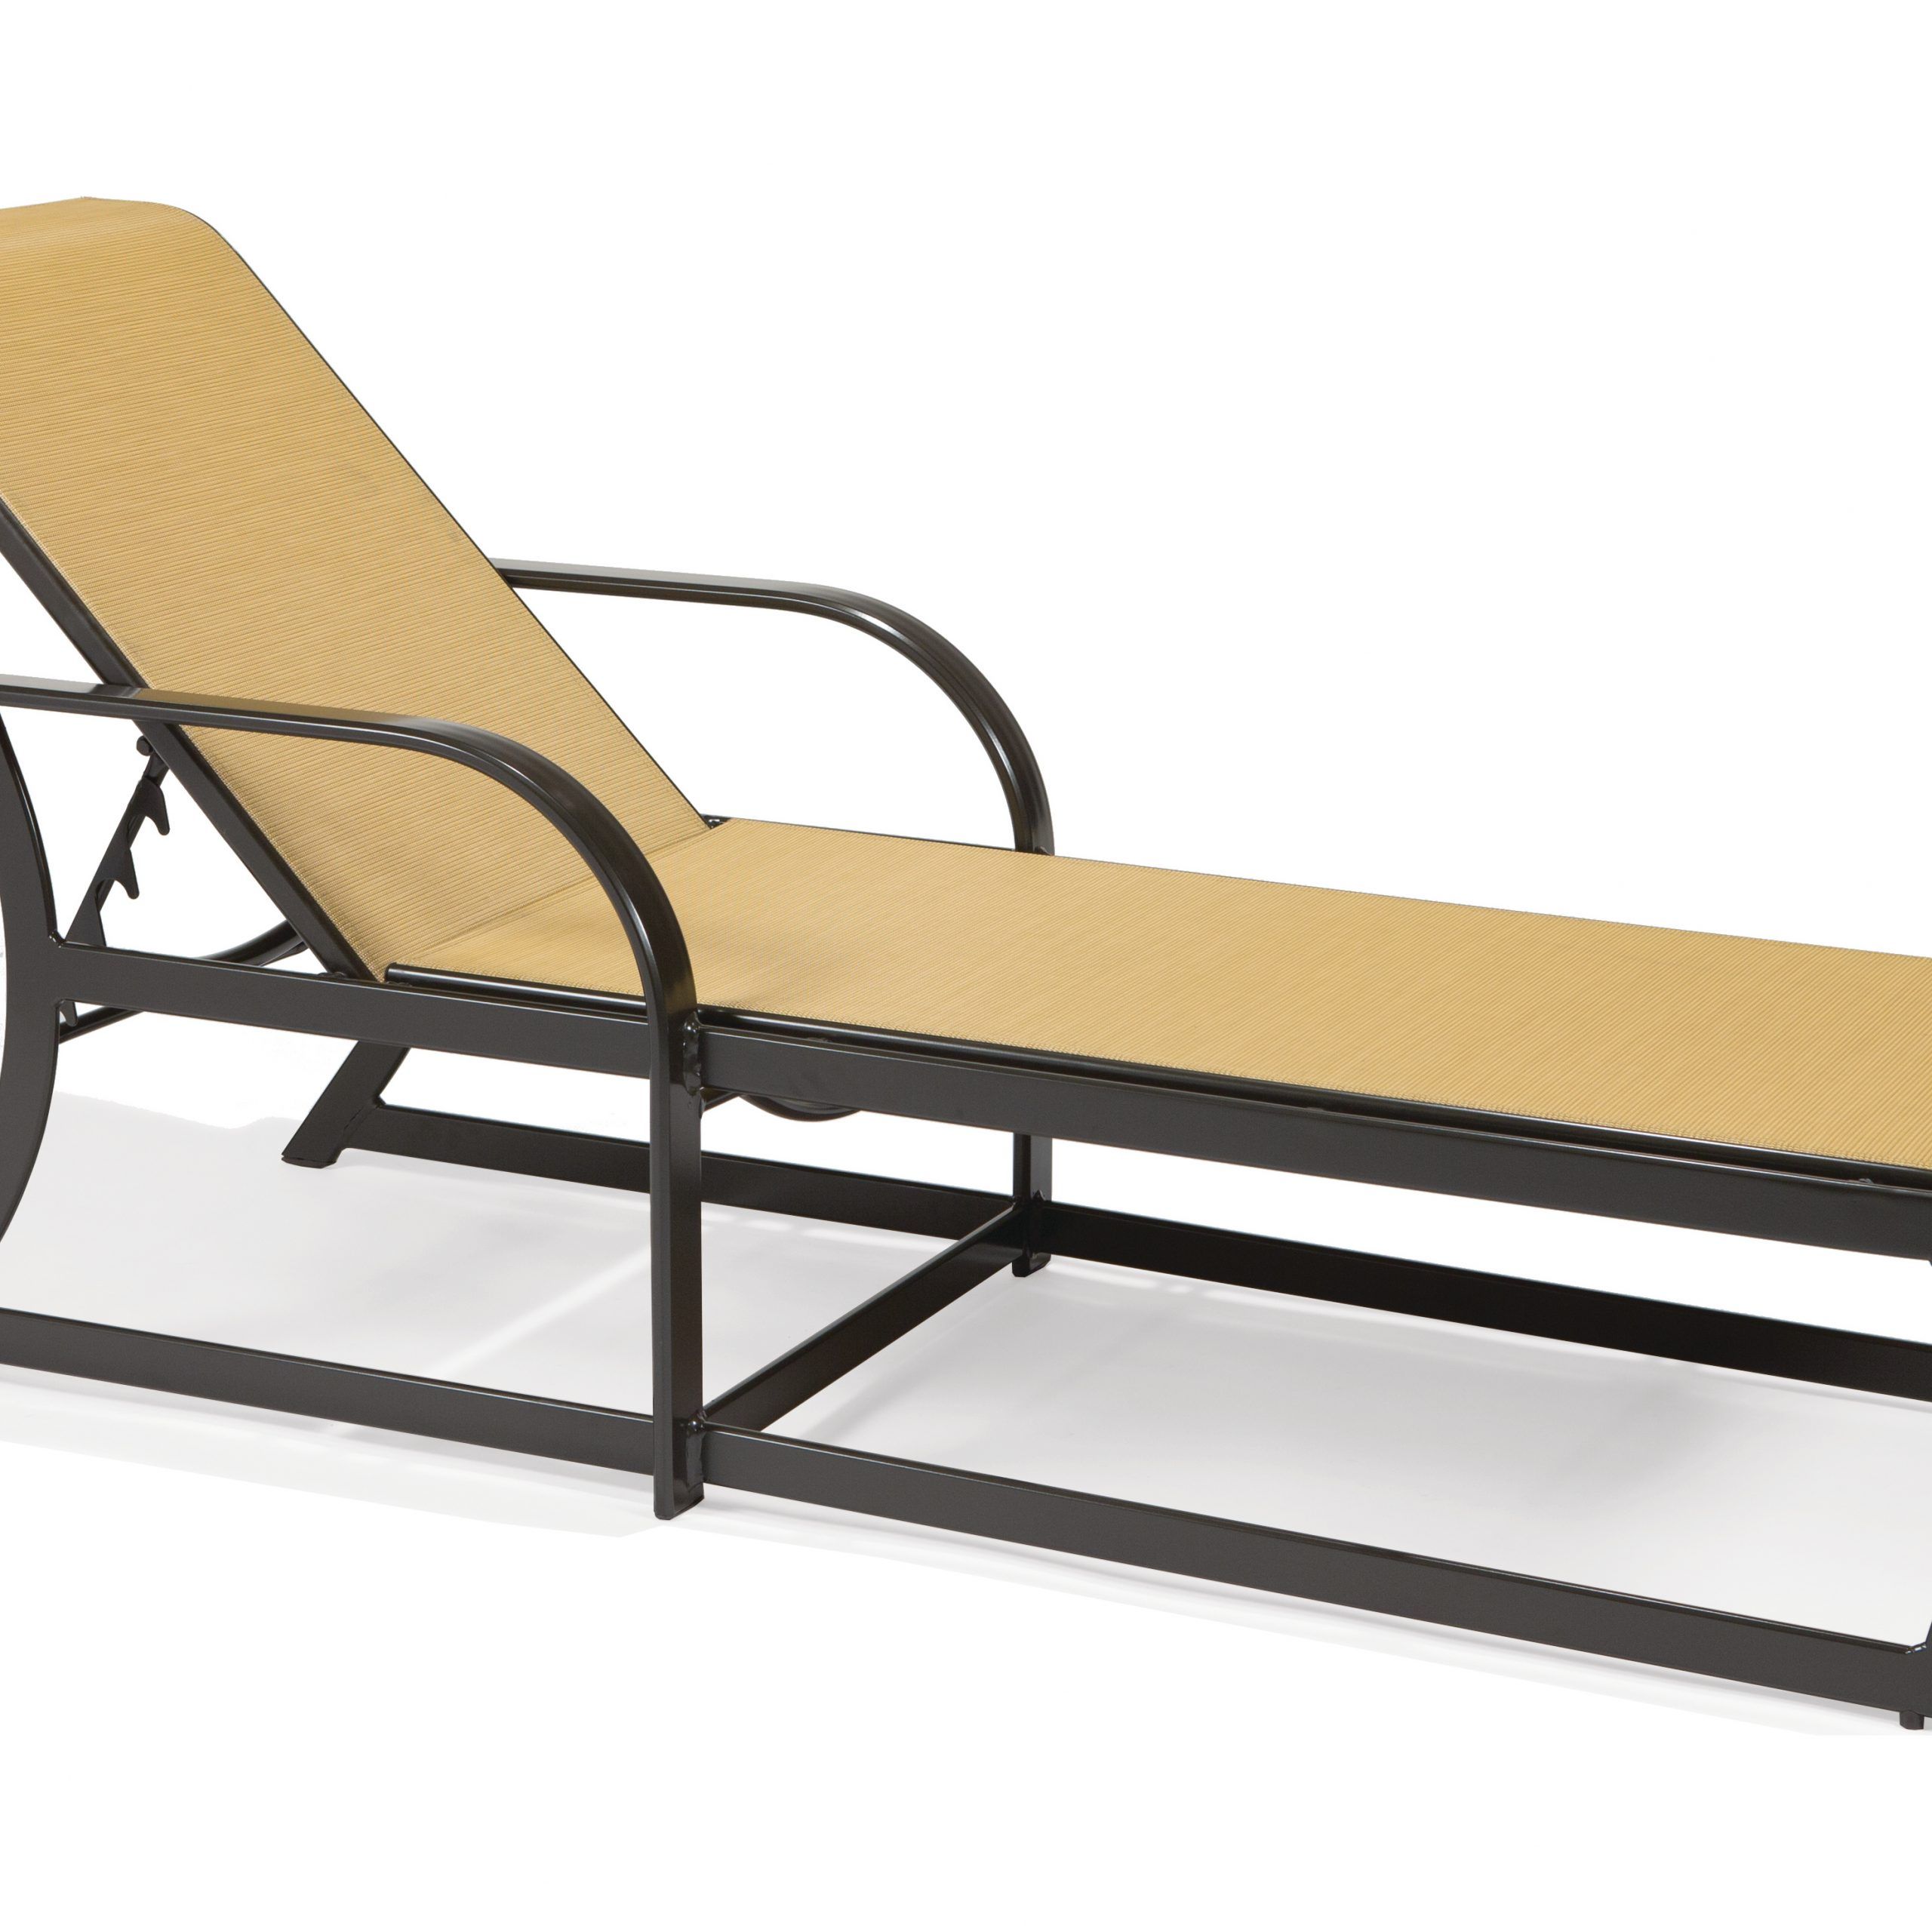 Winston Key West Sling Aluminum Arm Chaise Lounge | M8009 Throughout Steel Arm Outdoor Aluminum Chaise Sets (View 1 of 15)